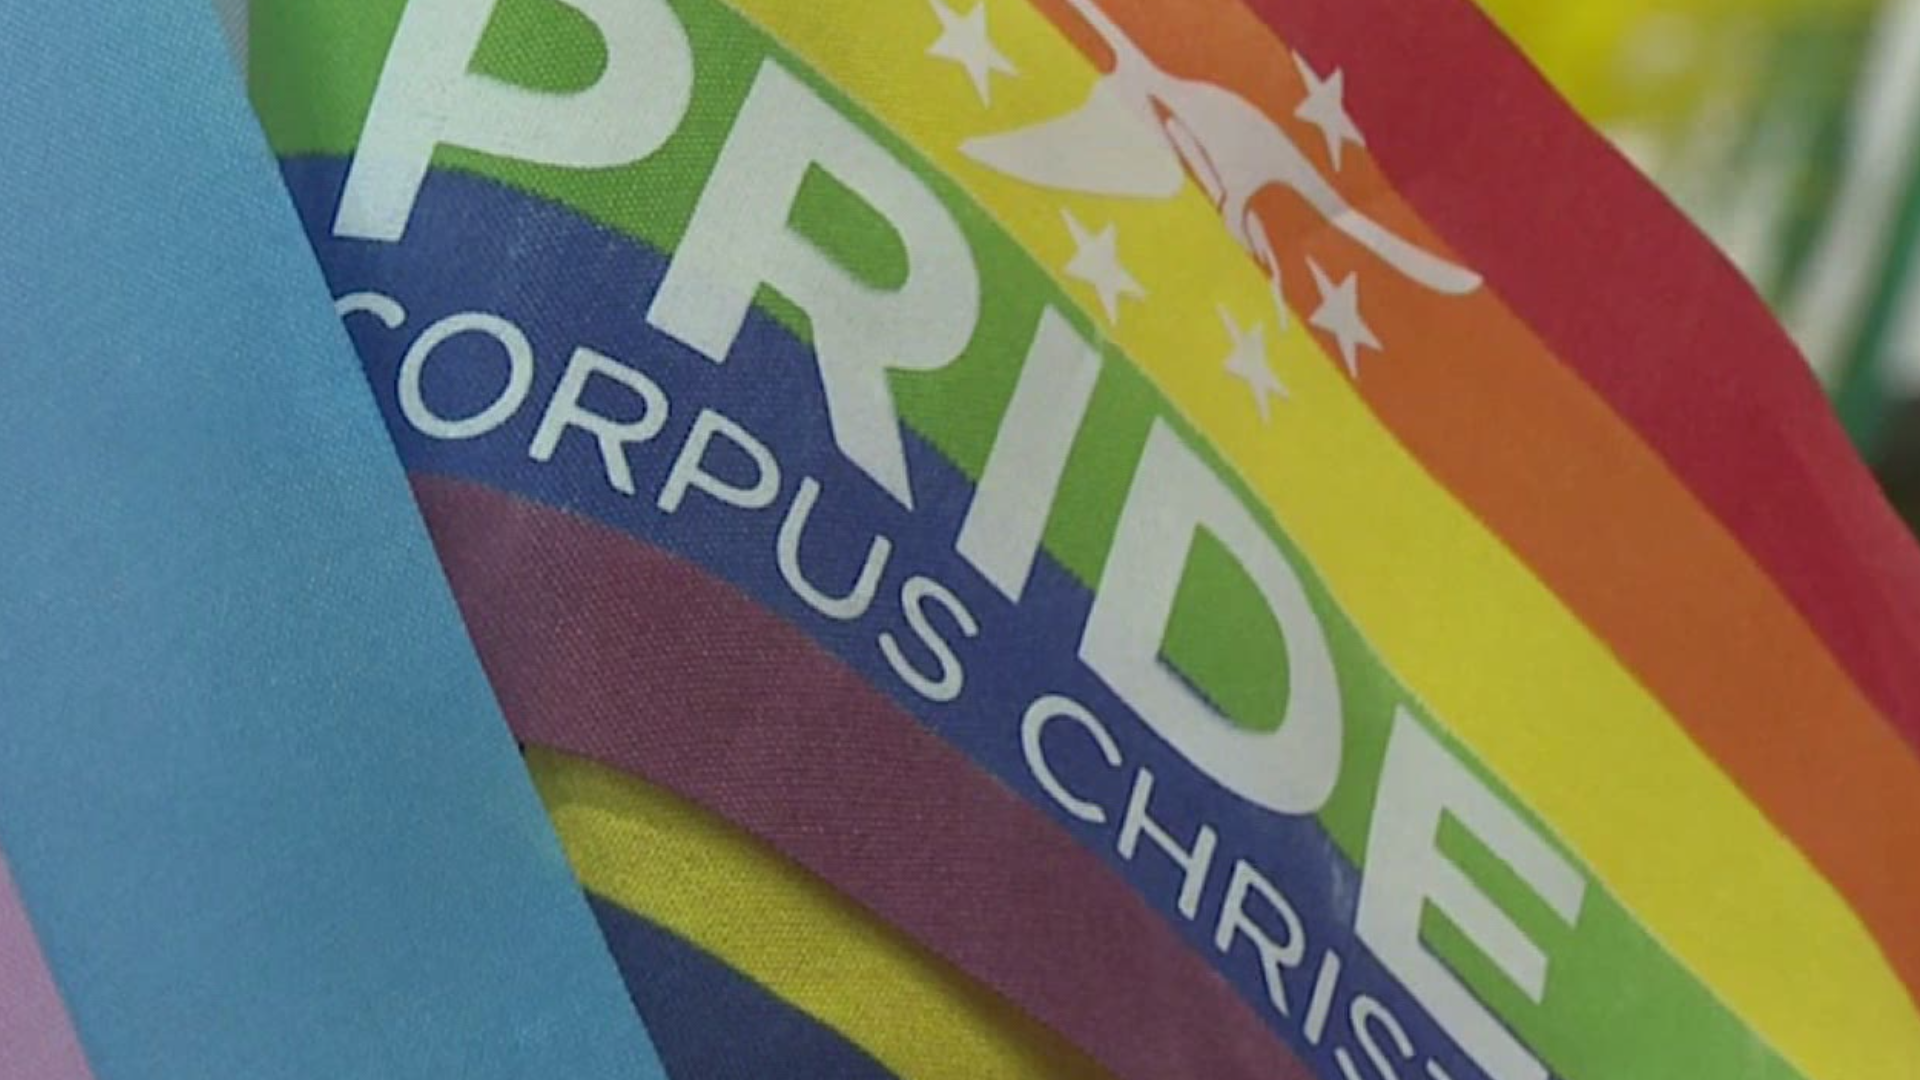 Pride month is coming to an end, but there are still many resources and programs right here in the Coastal Bend for LGBTQ+ community members and allies.